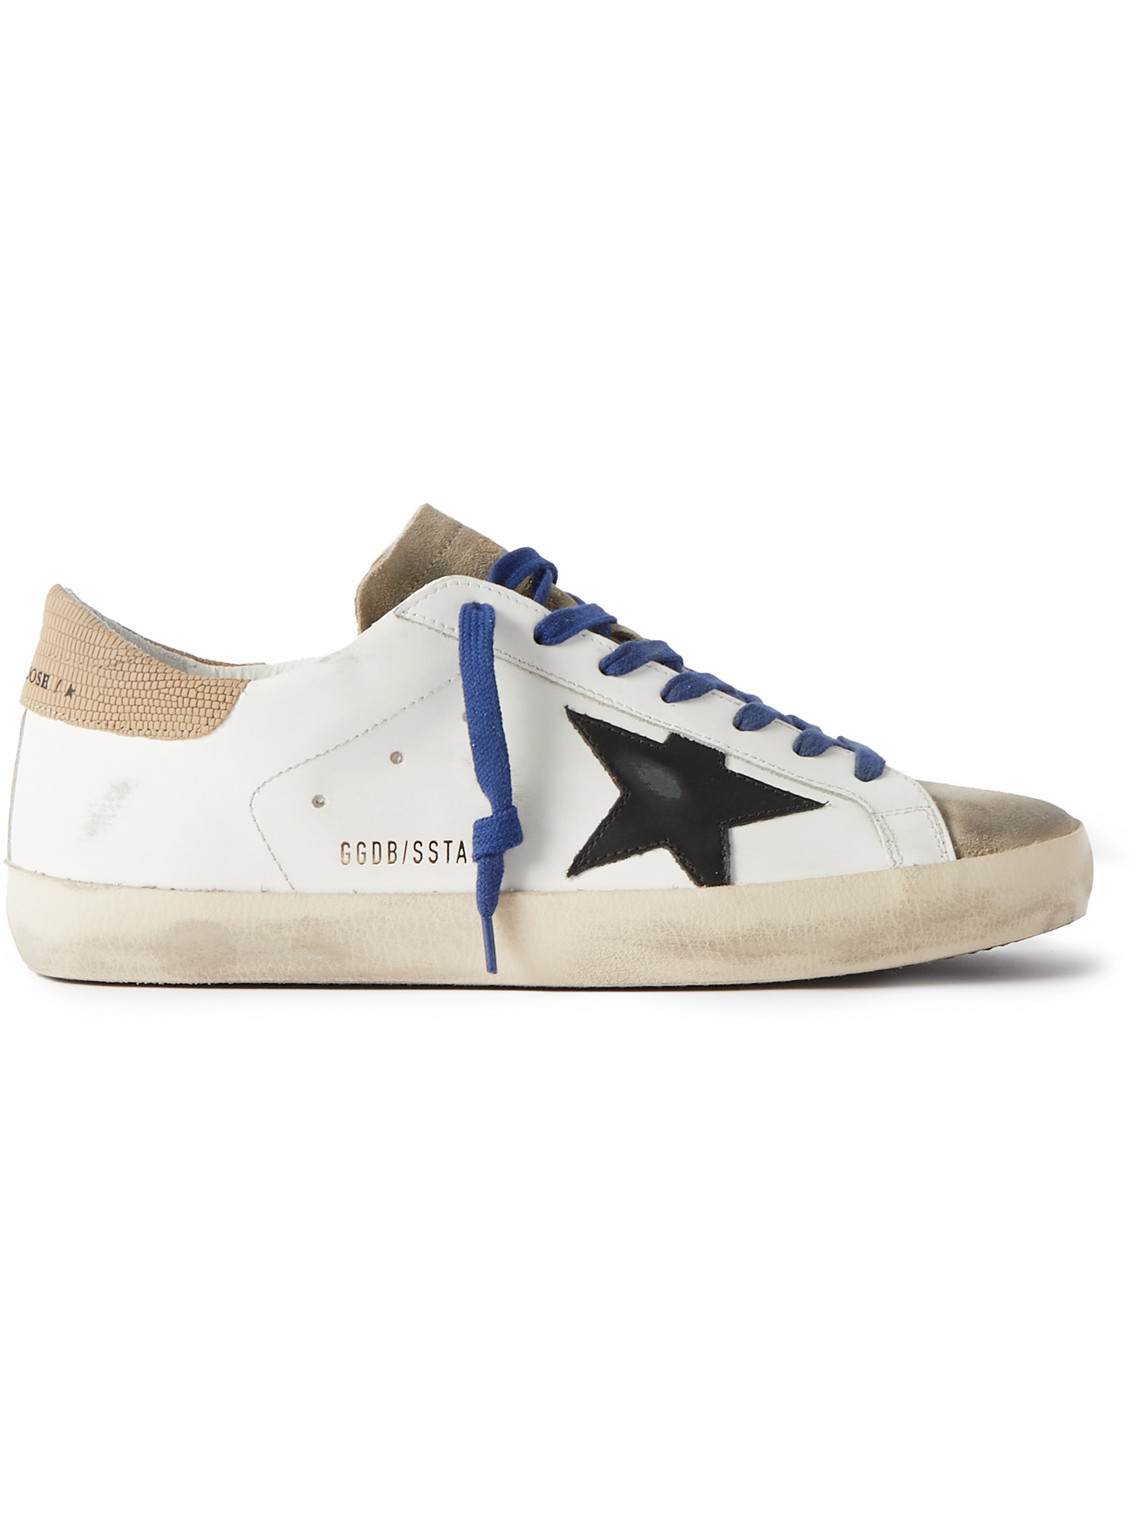 Superstar Distressed Leather Upper Suede Sneakers